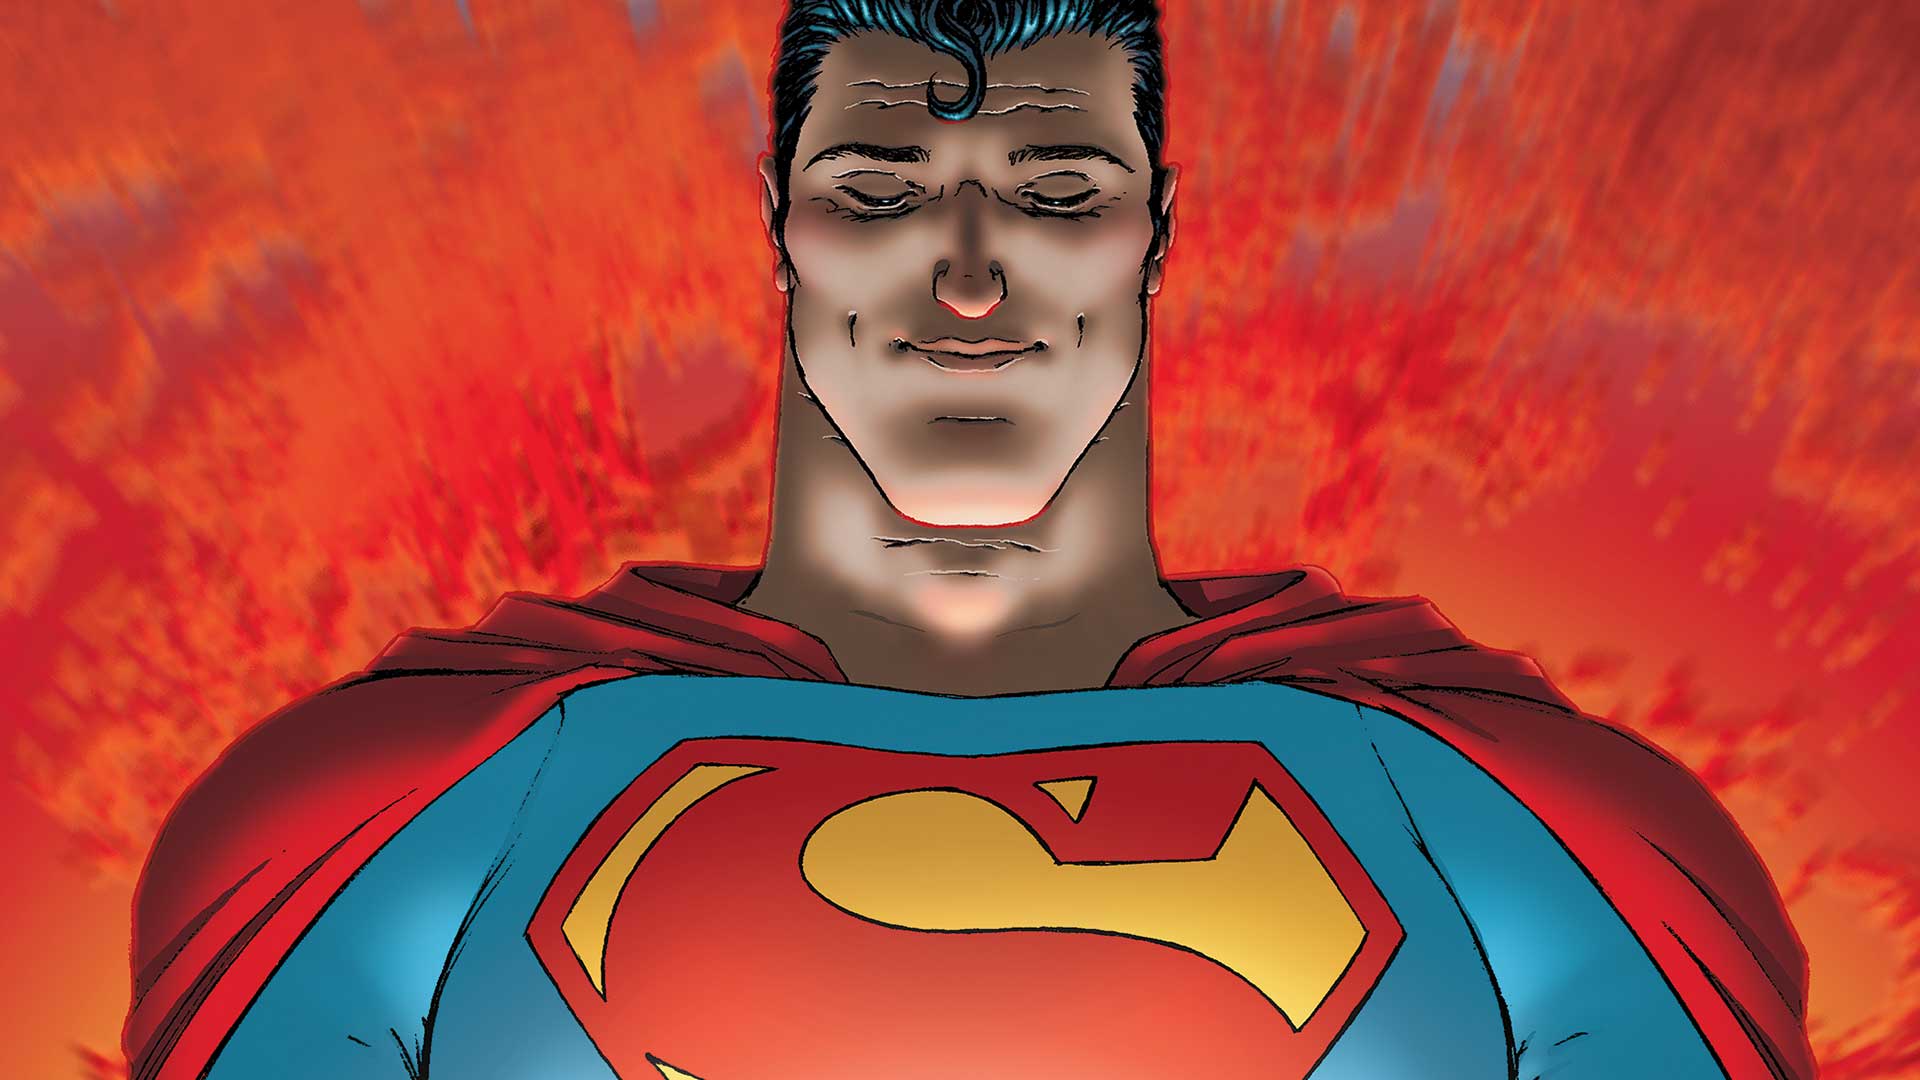 All-Star Superman deals with his mortality